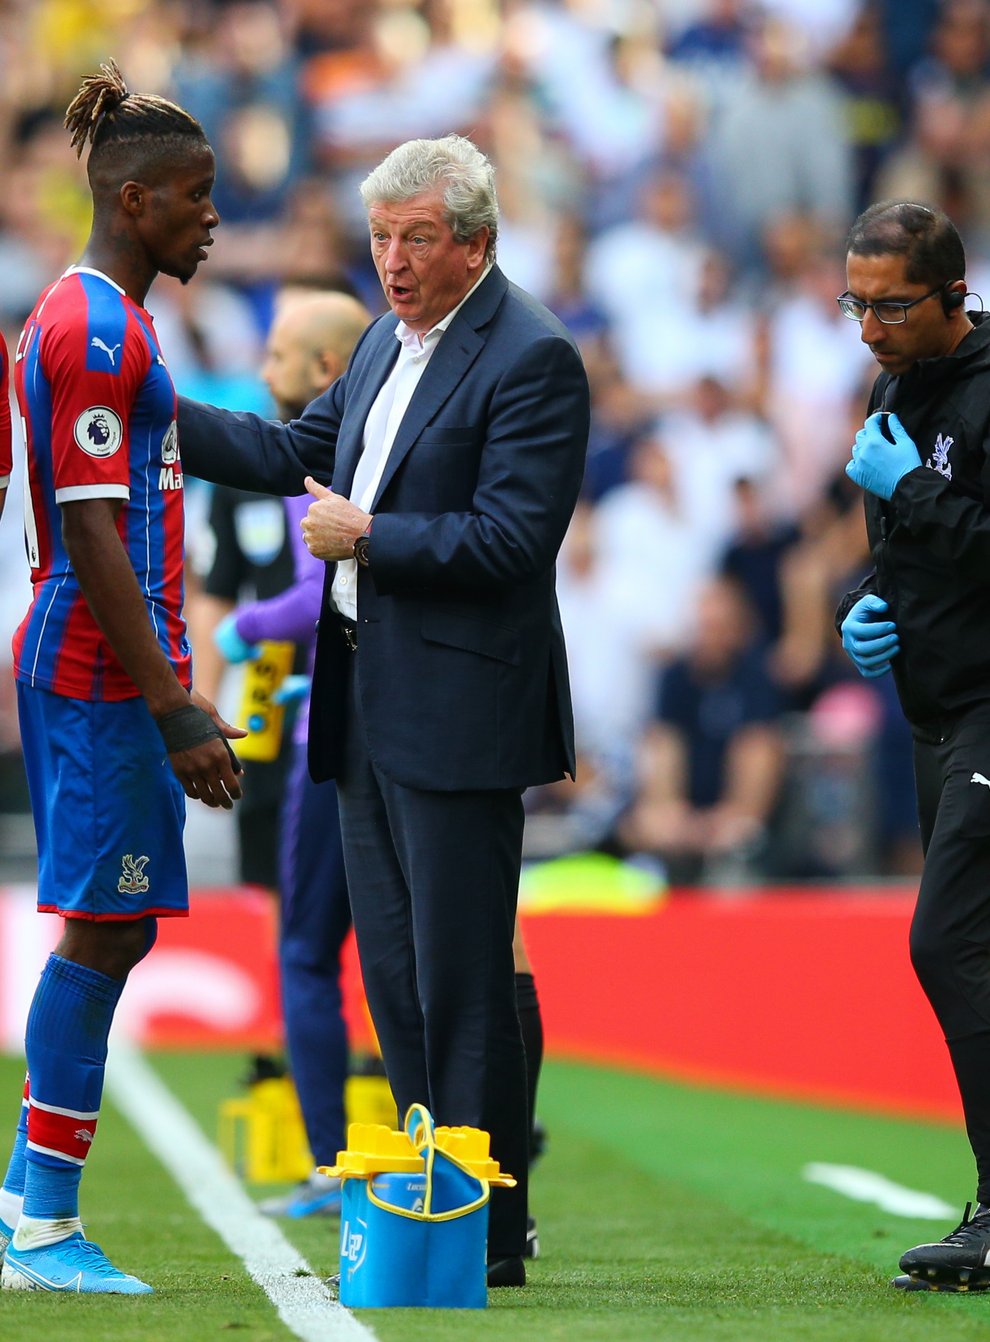 Zaha has been Palace's talisman for a number of seasons in the Premier League